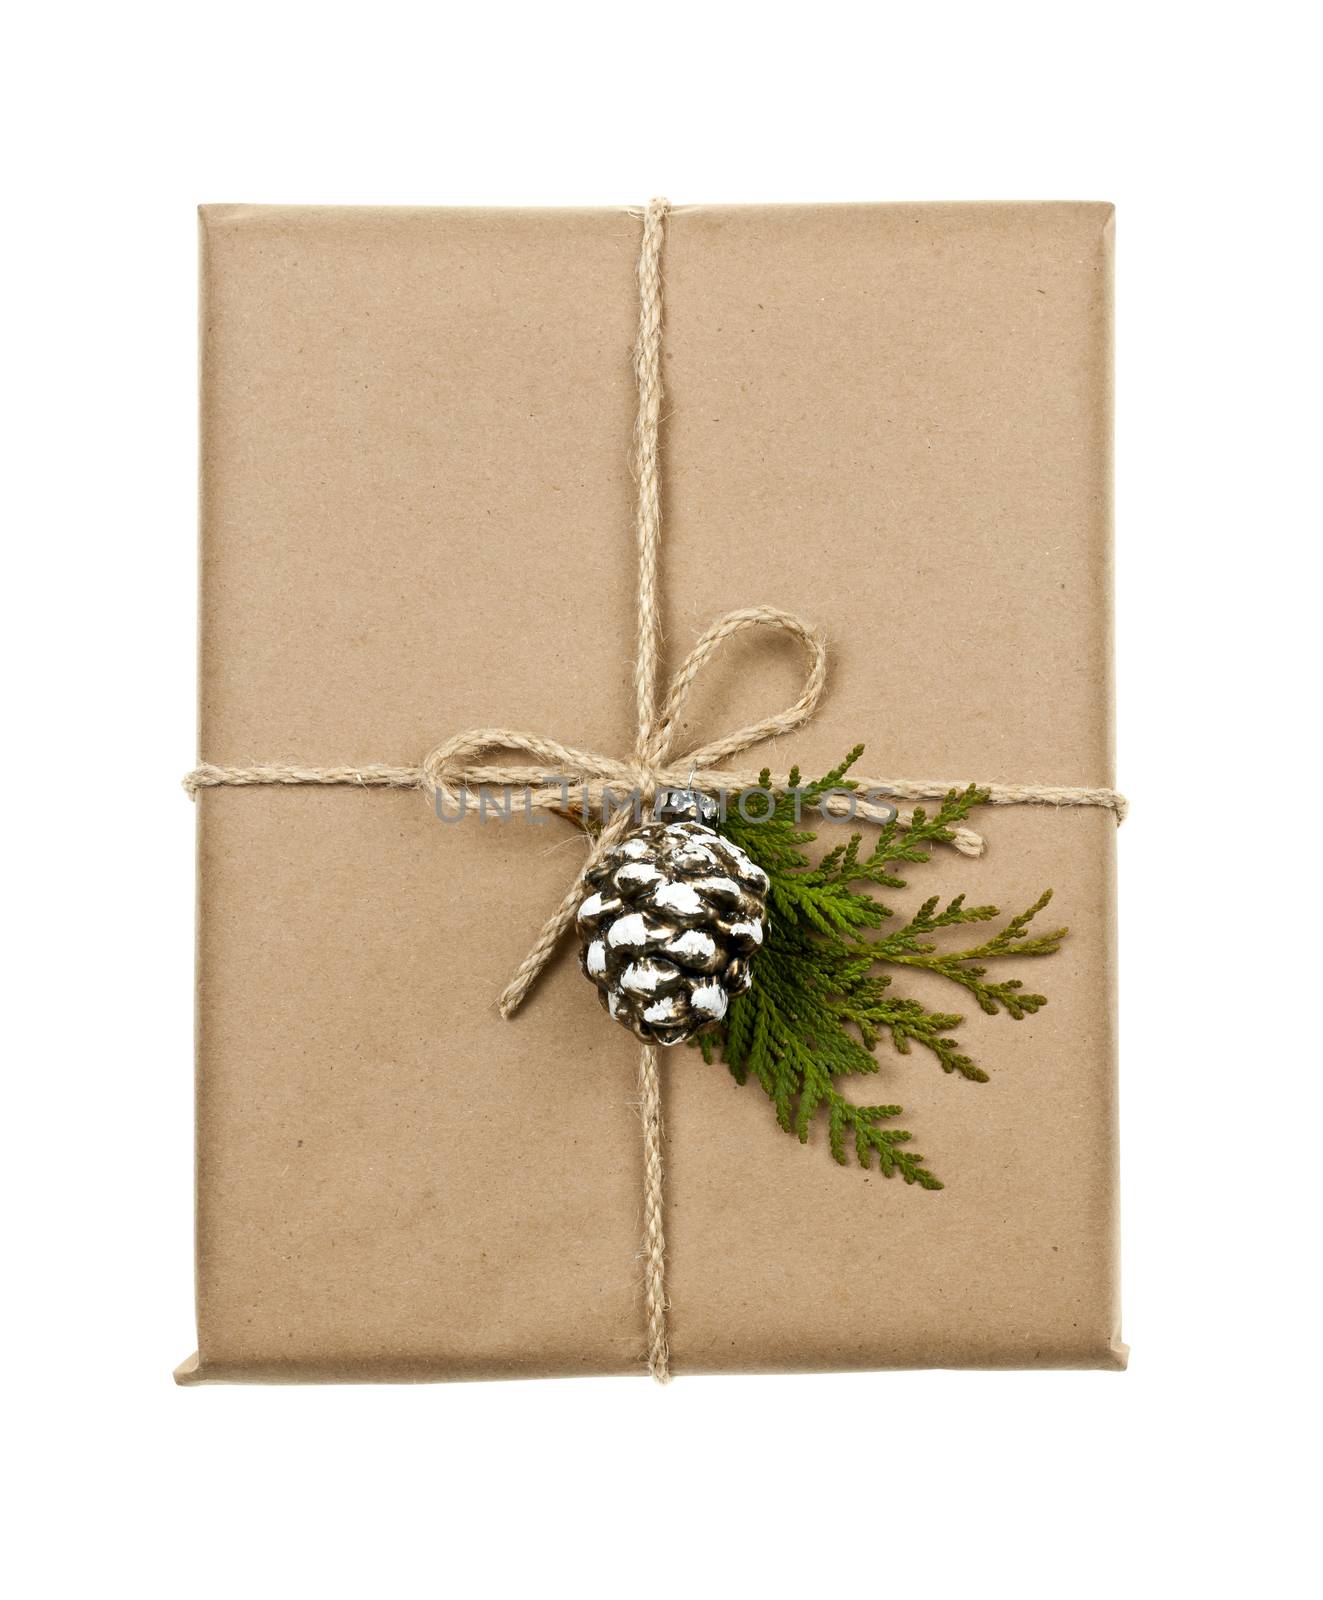 Christmas present in brown paper tied with string by elenathewise